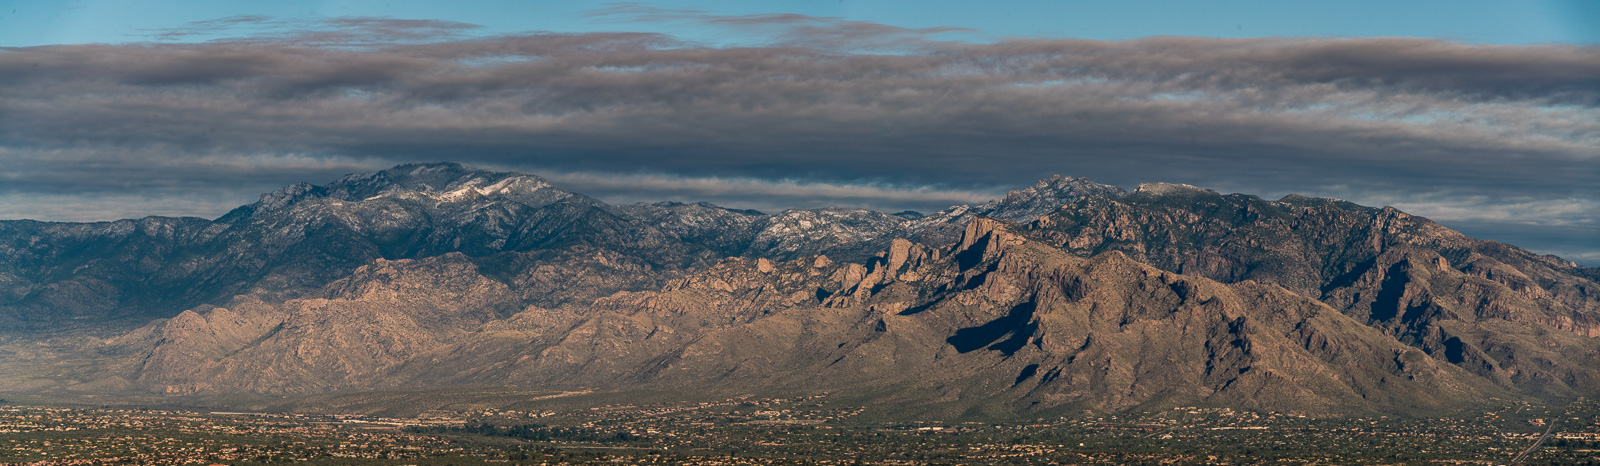 Santa Catalina Mountains from Panther Peak in the Tucson Mountains. January 2017.